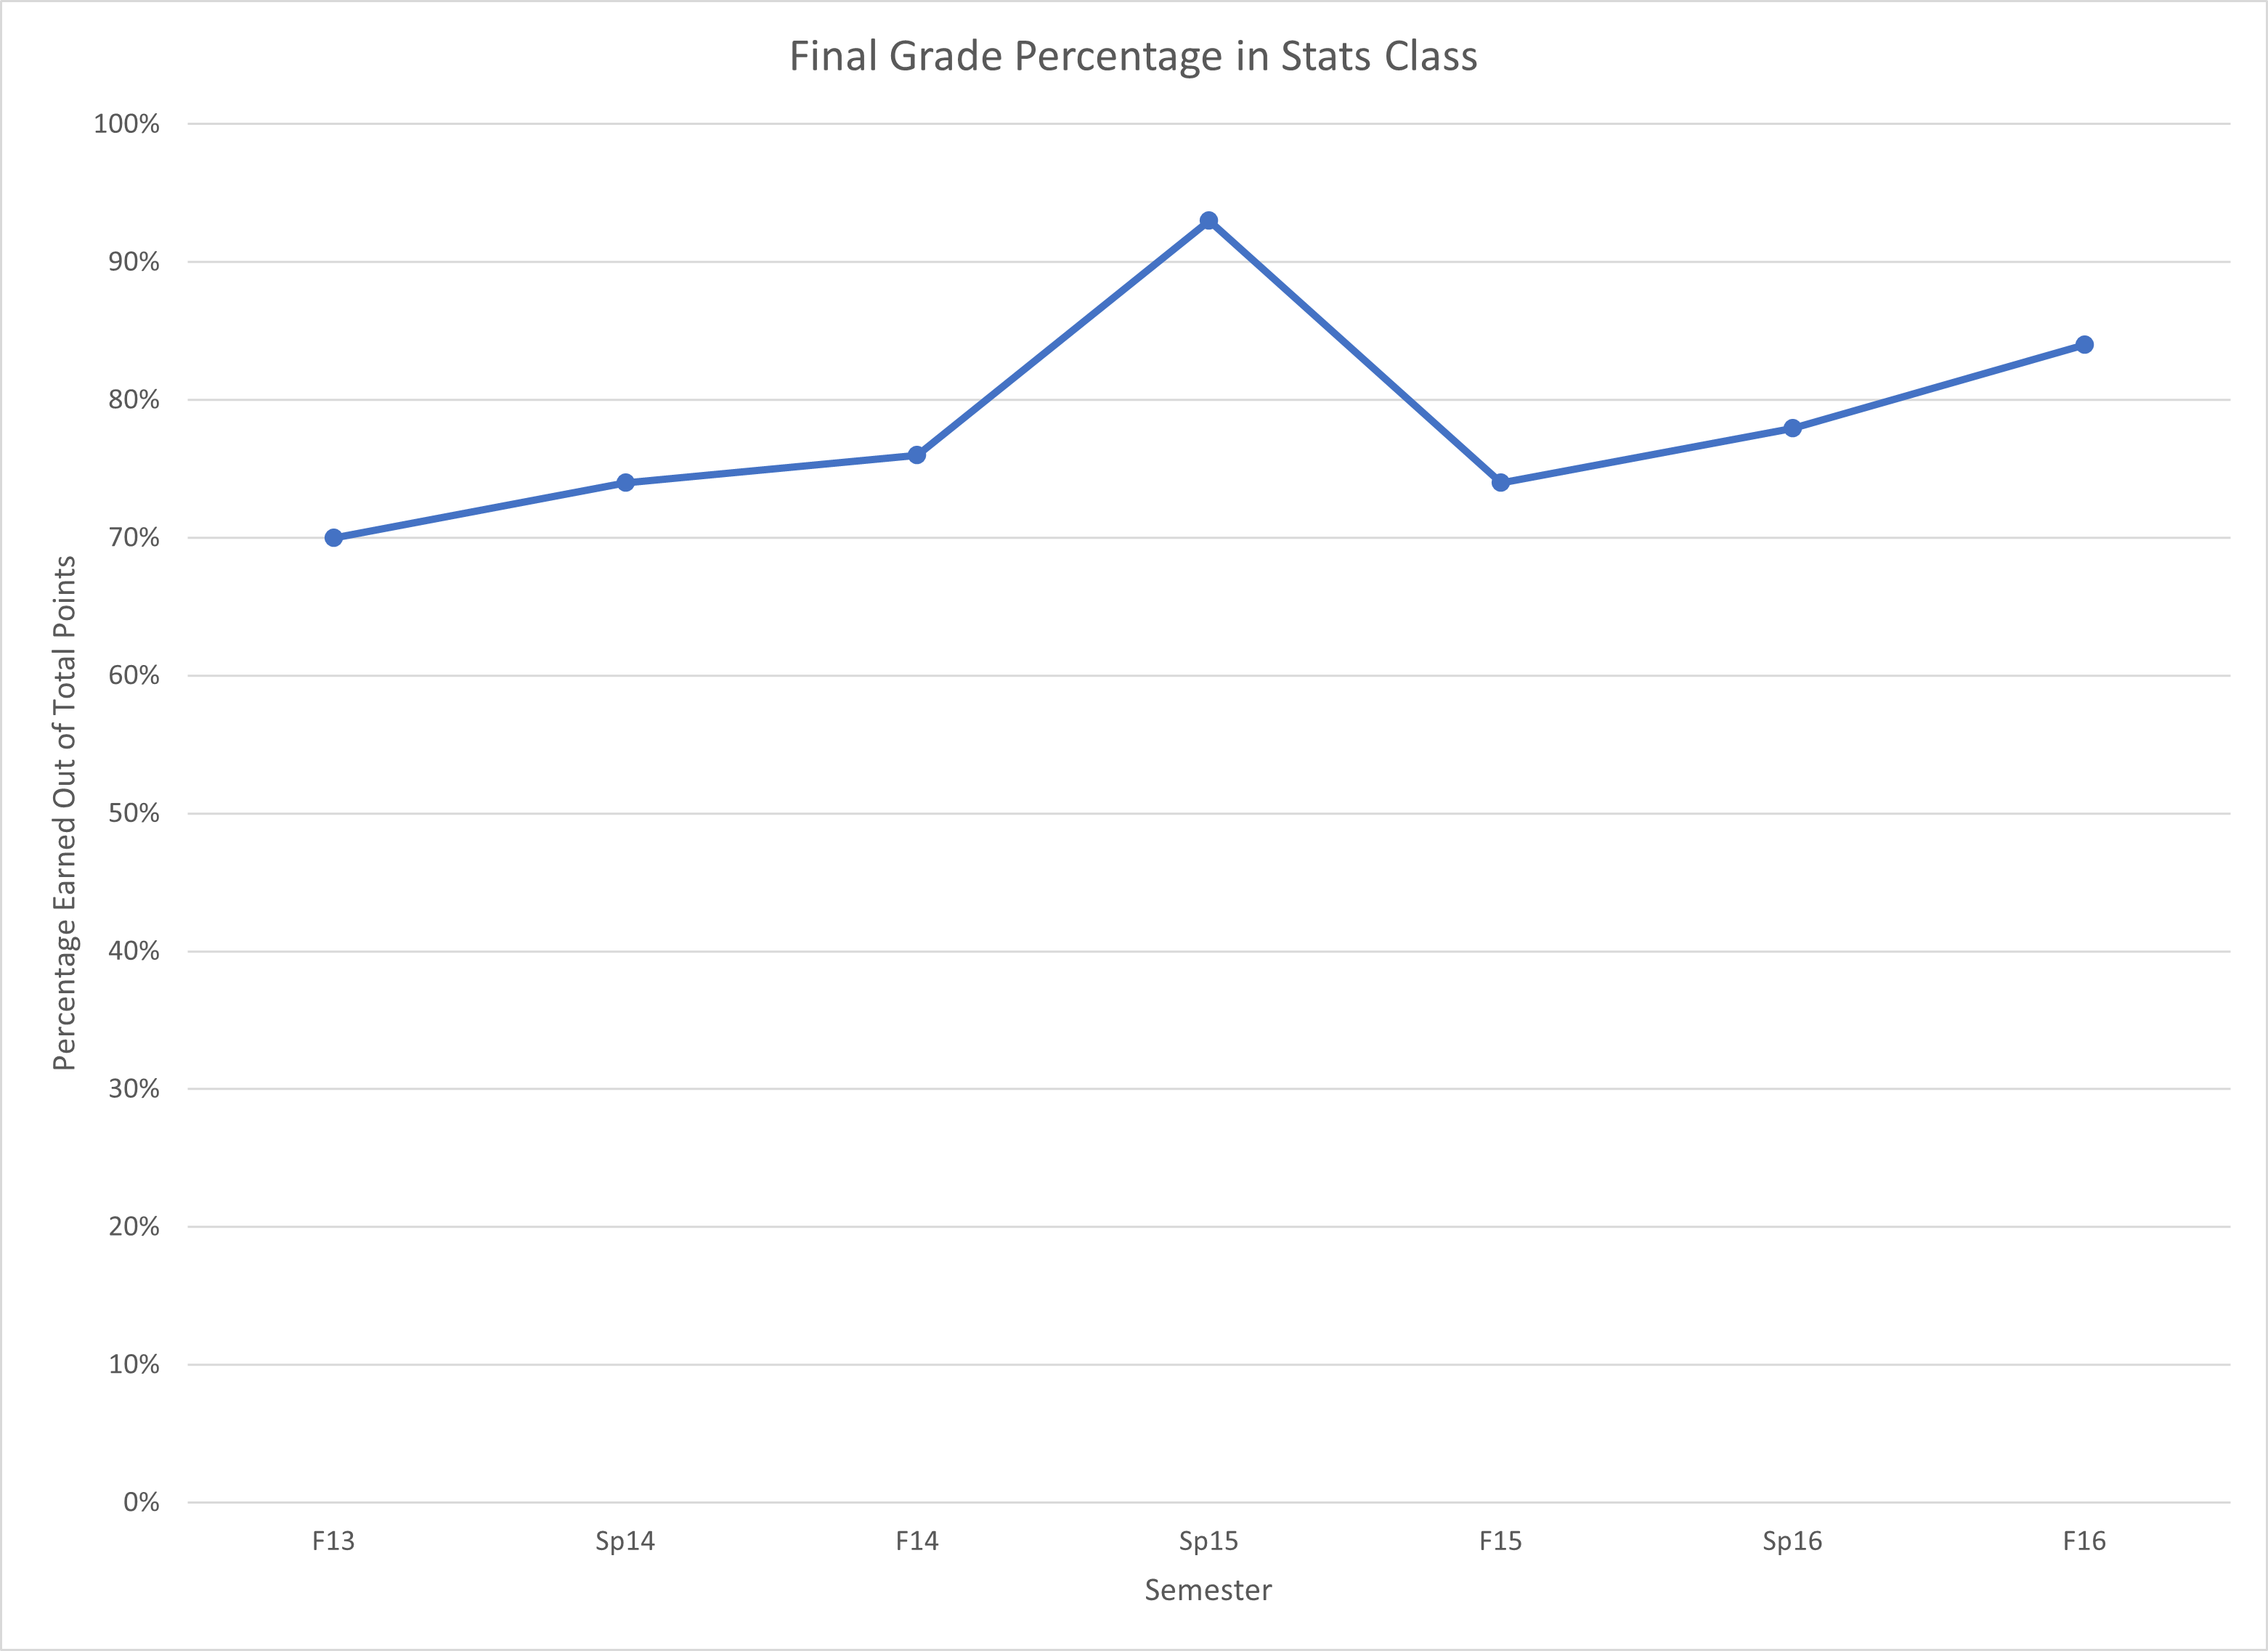 Line graph showing the percentage of points earned for seven semesters.